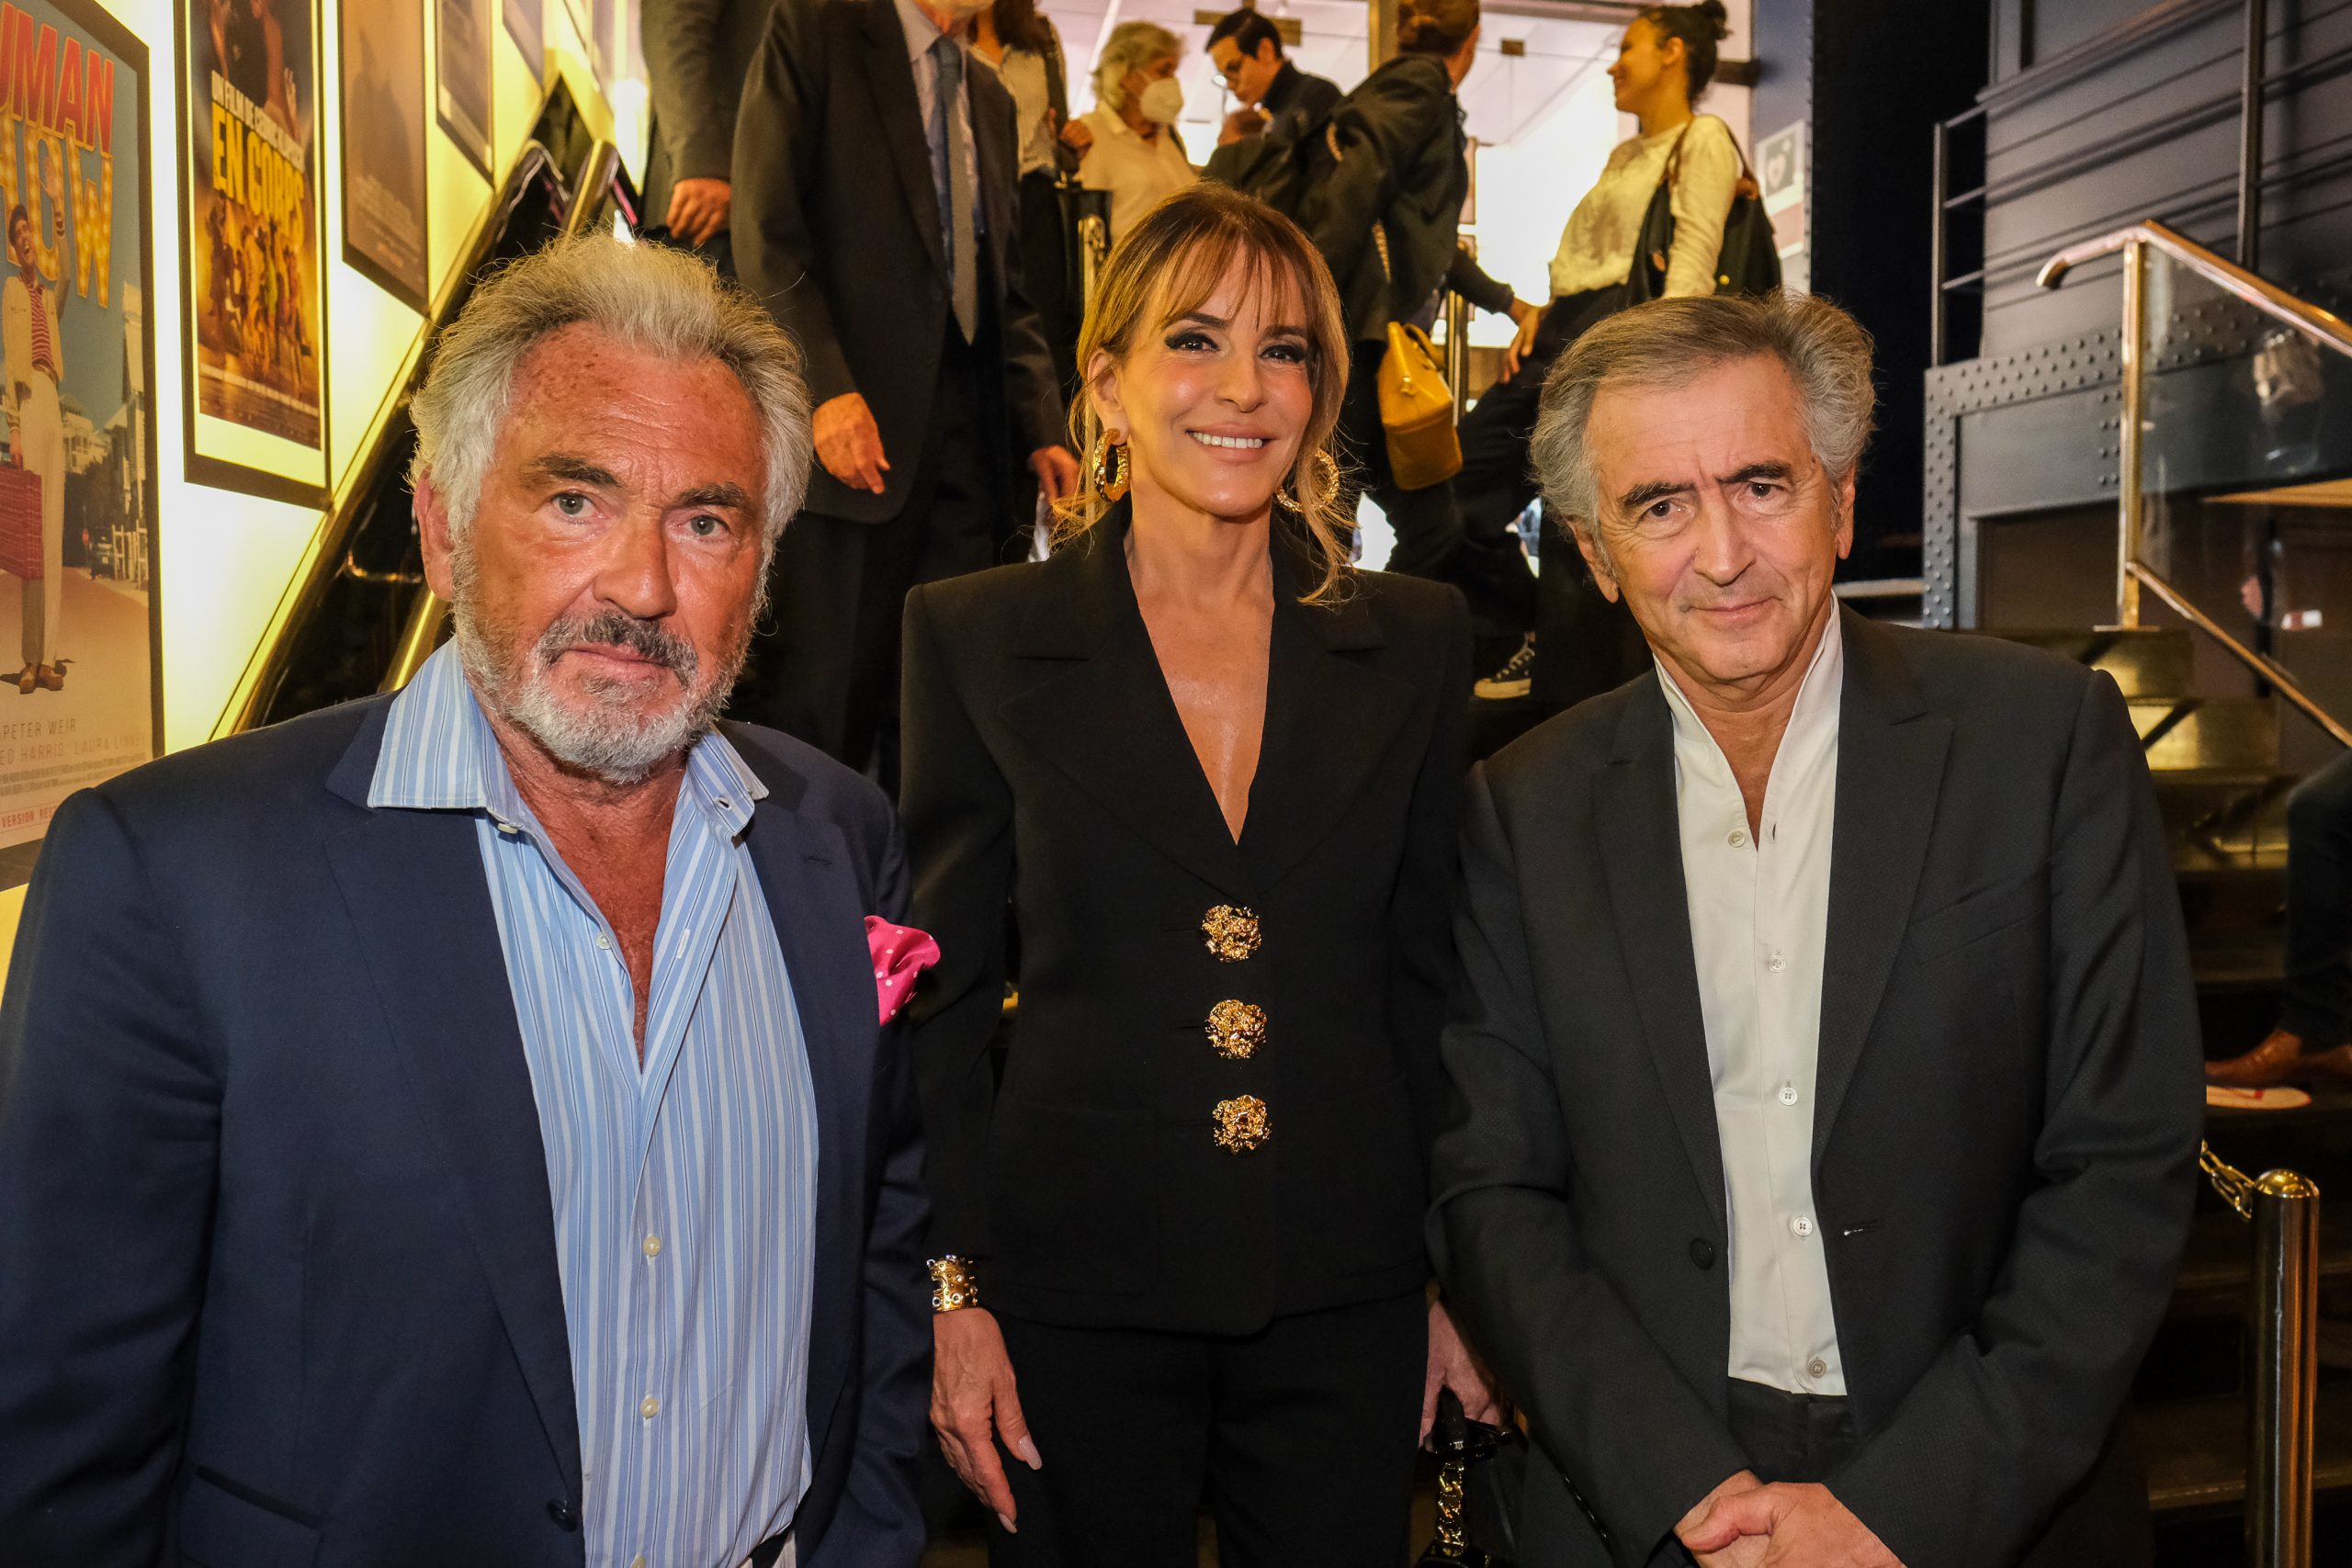 Bernard-Henri Lévy with Princess Patricia de Belsunce d'Arenberg and Jean-Paul Enthoven, during the preview of BHL's film "Why Ukraine", at the Cinéma Le Balzac in Paris.